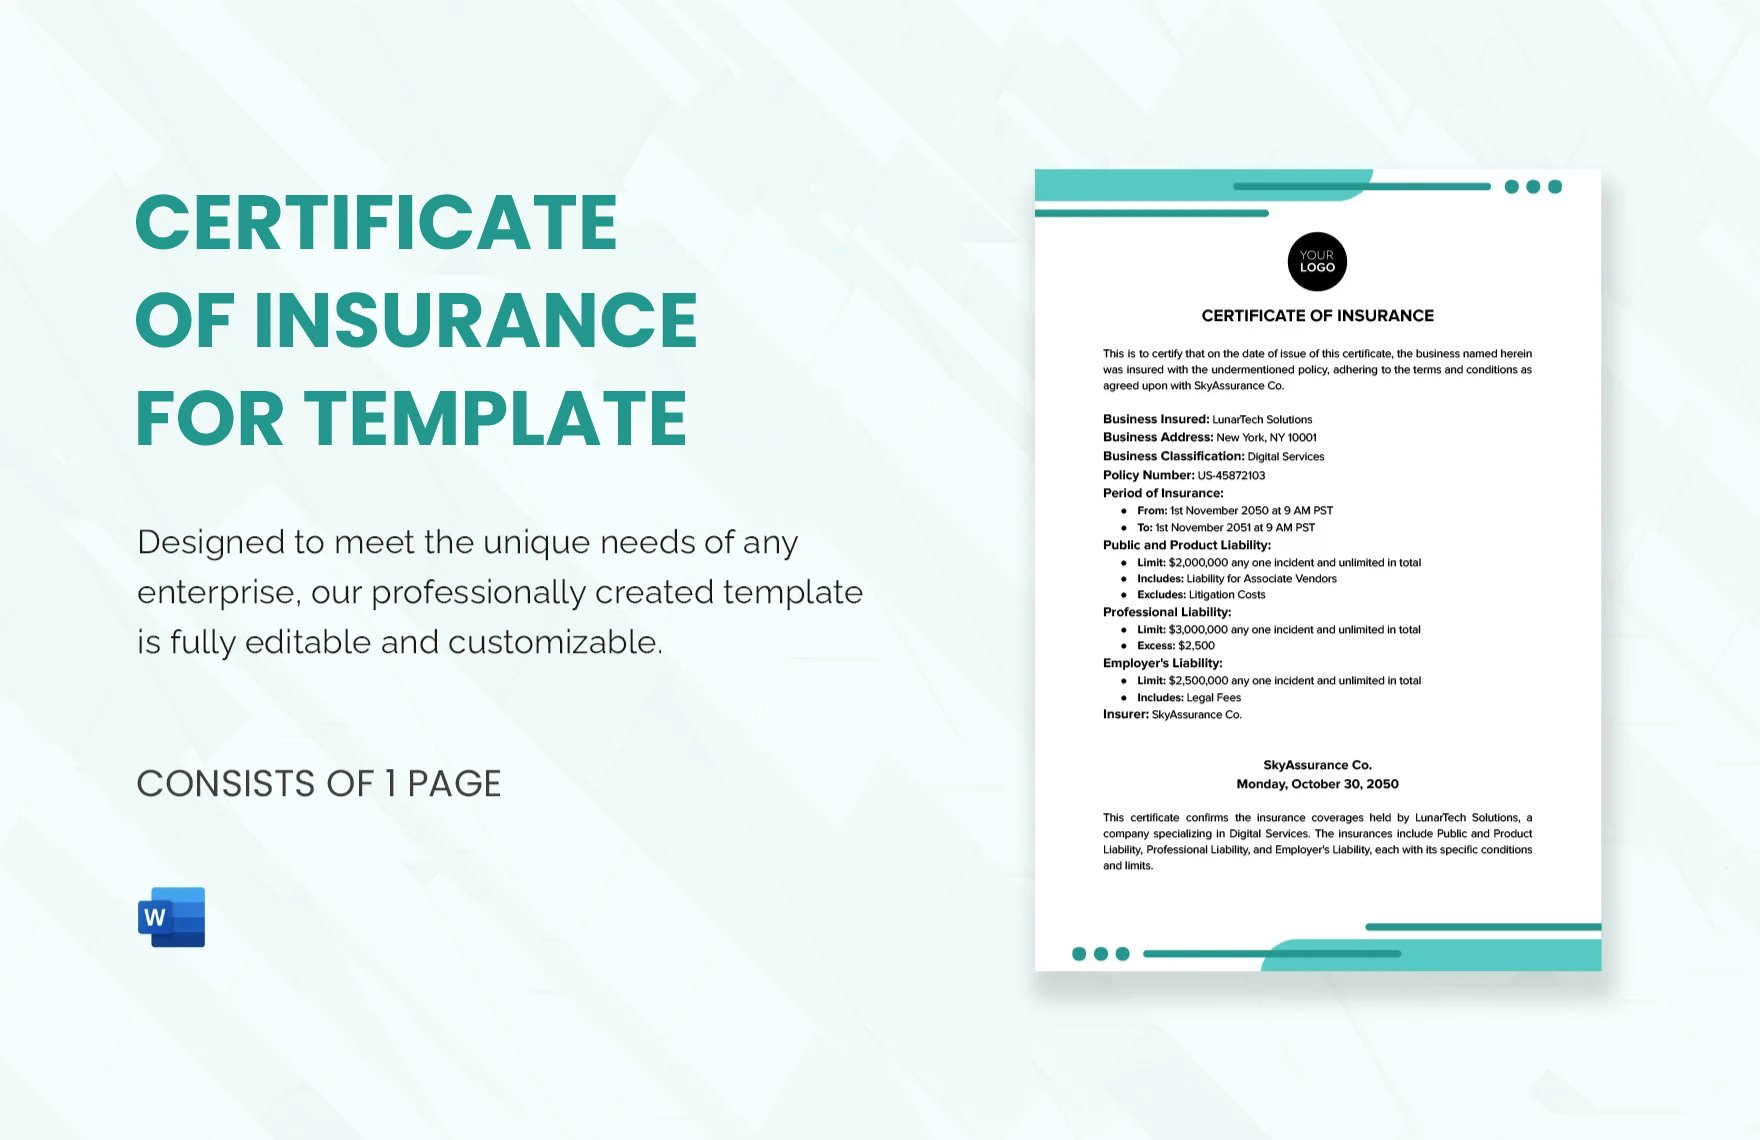 Certificate of Insurance for Business Template